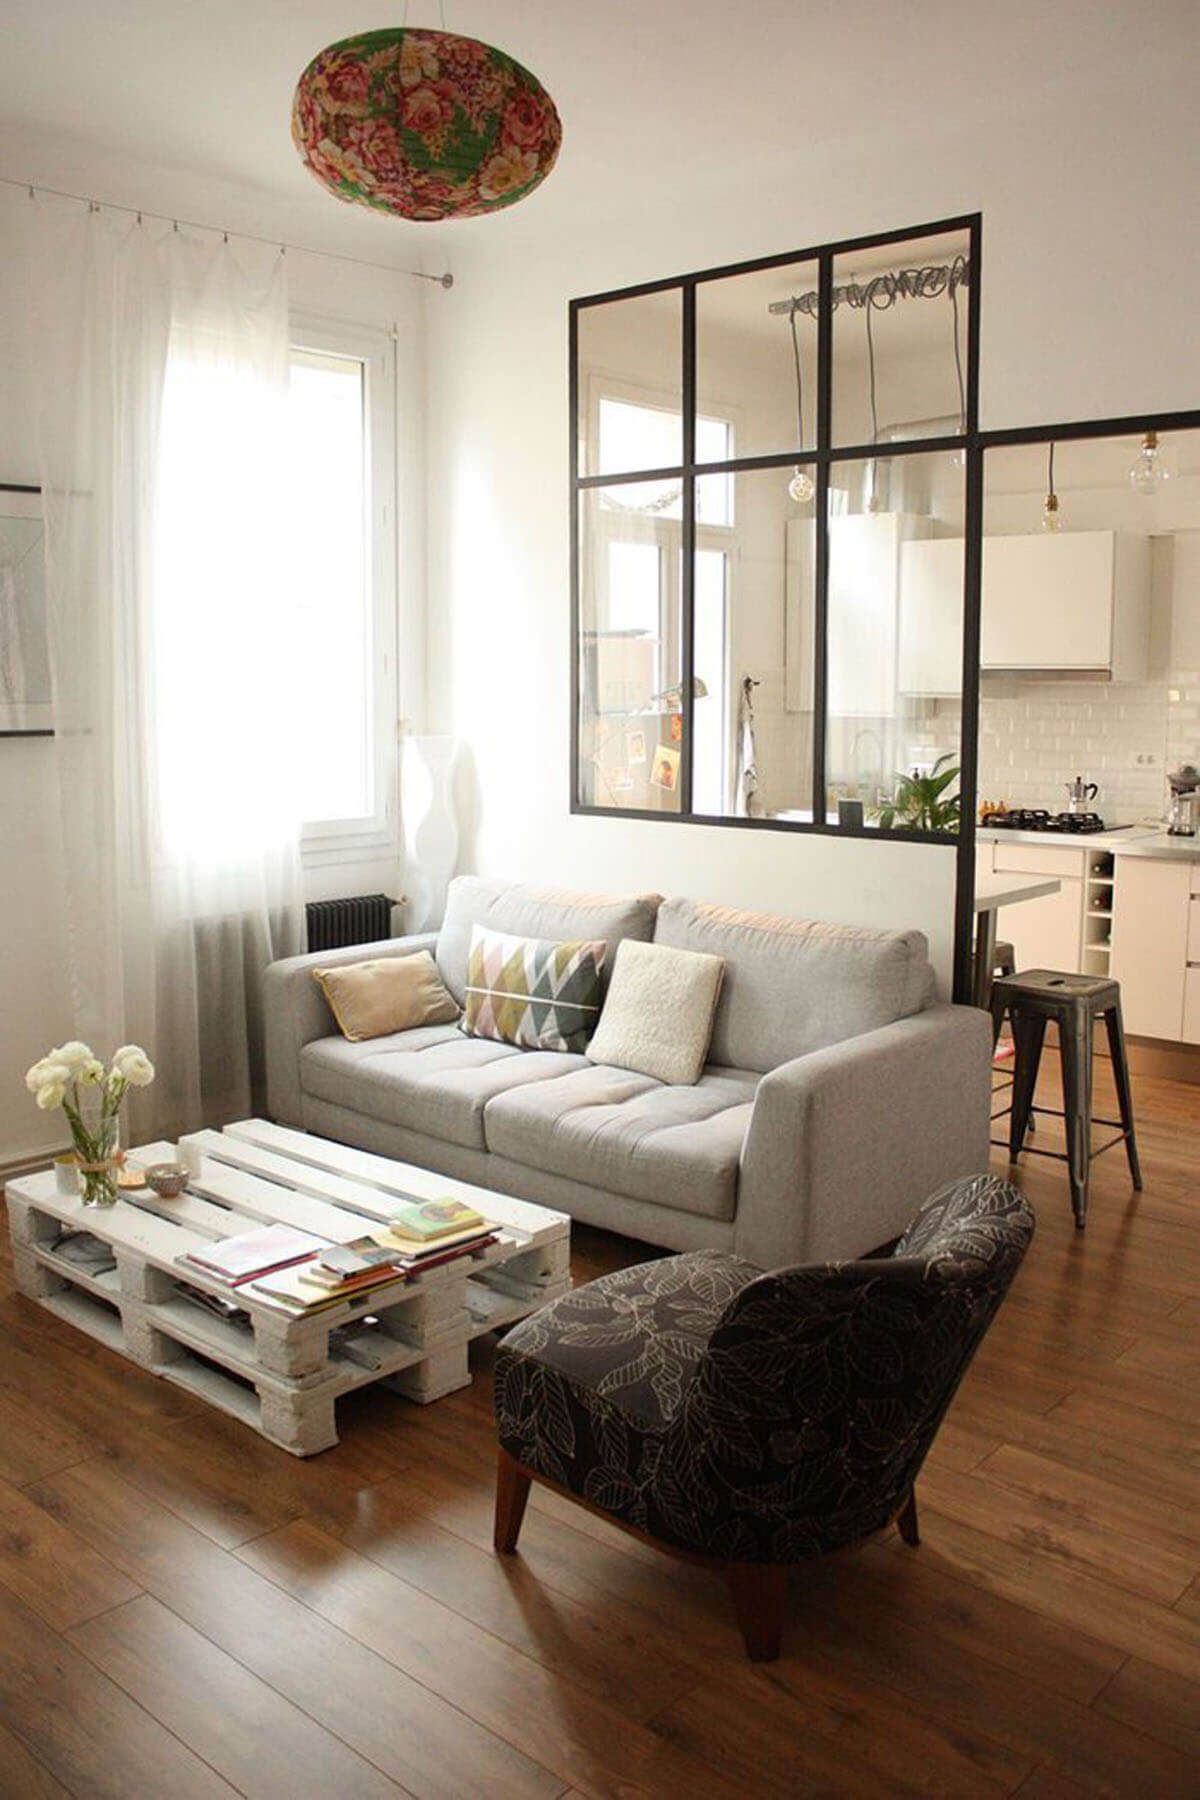 Small Space Decor: Transform Your Home With Creative Ideas